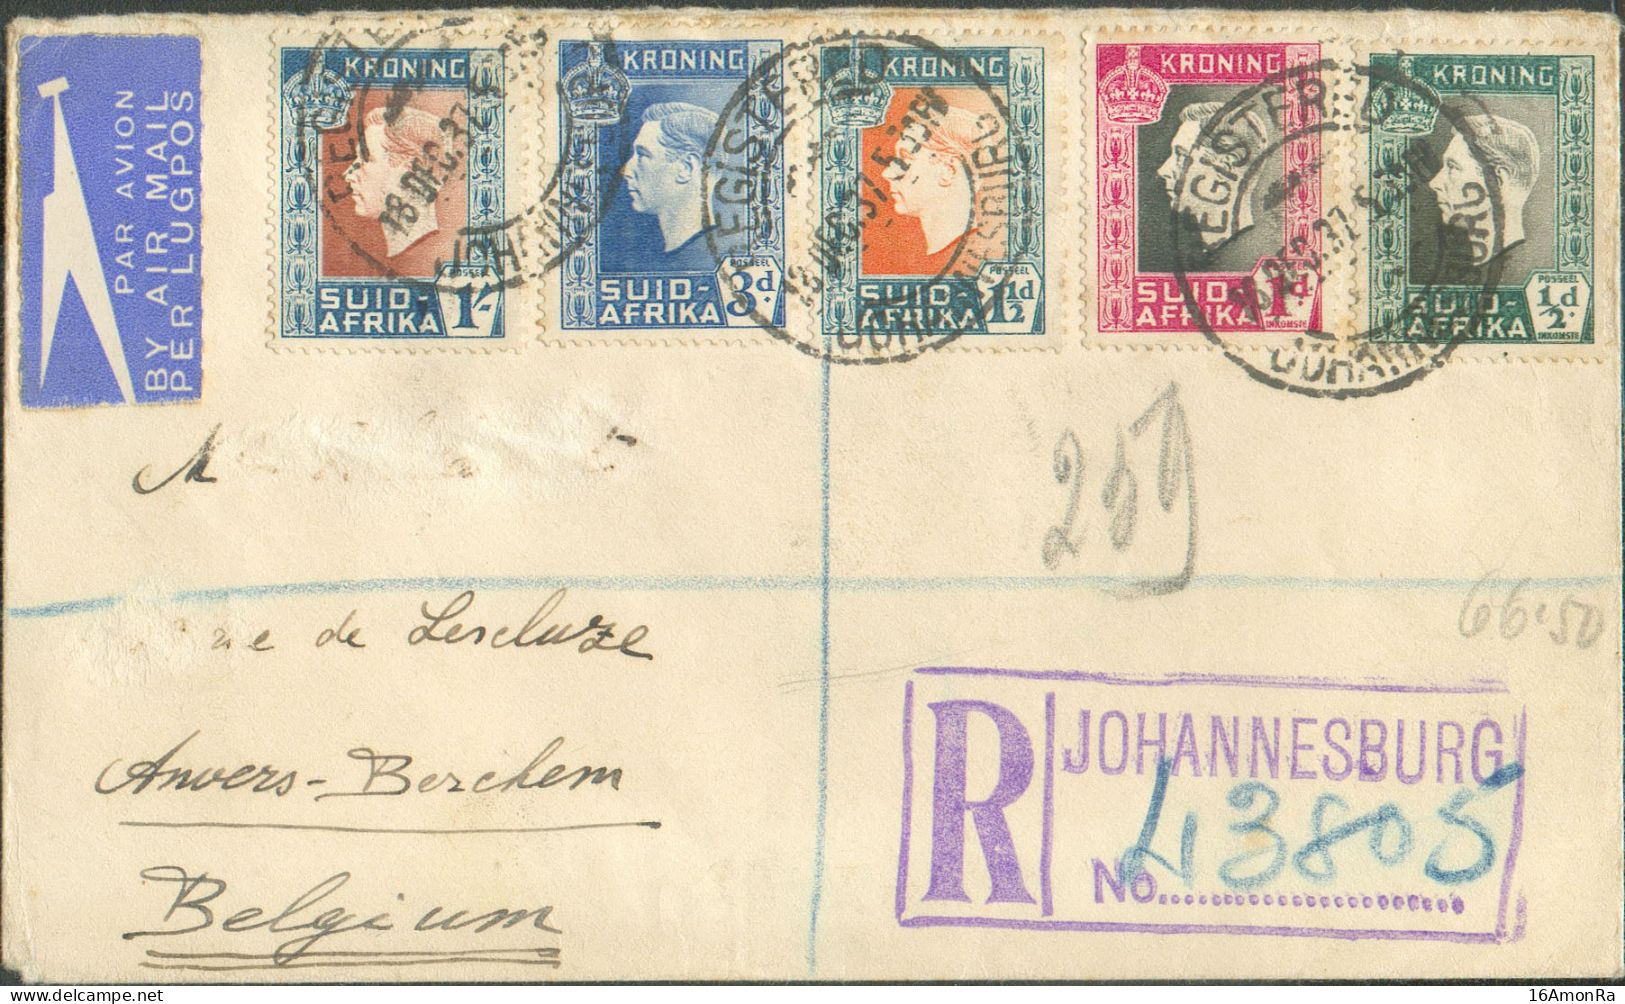 By Airmail Cover Franked 1s/6p. Canc. REGISTERED JOHANNESBURG 18 Dec. 1937 Registered To Anvers (Belgium)  - 20914 - Posta Aerea